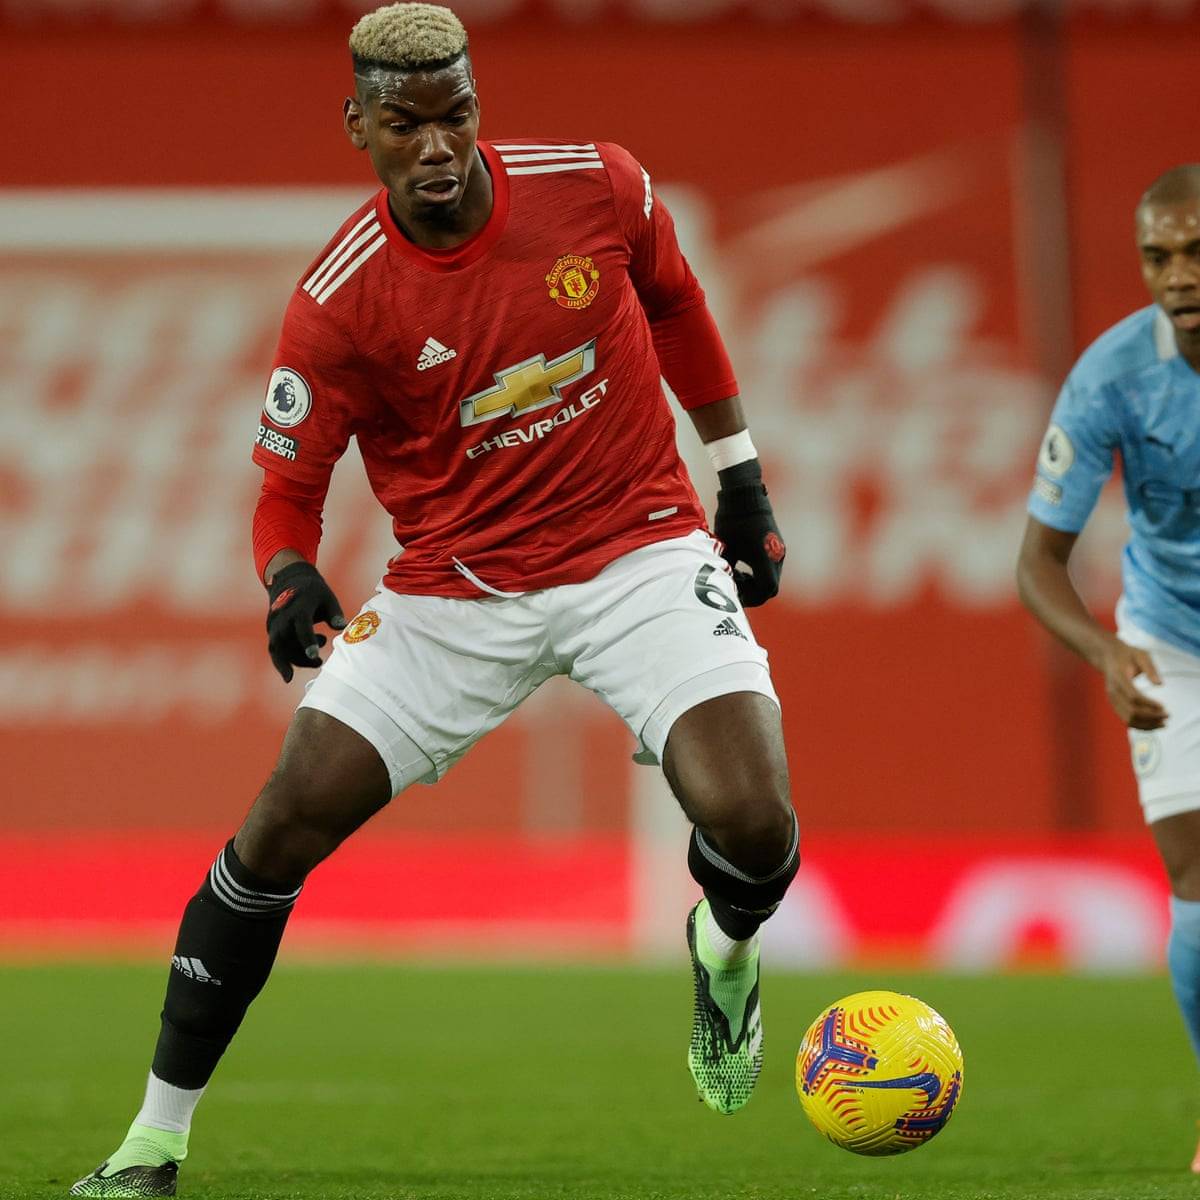 Paul Pogba as a member of Manchester United